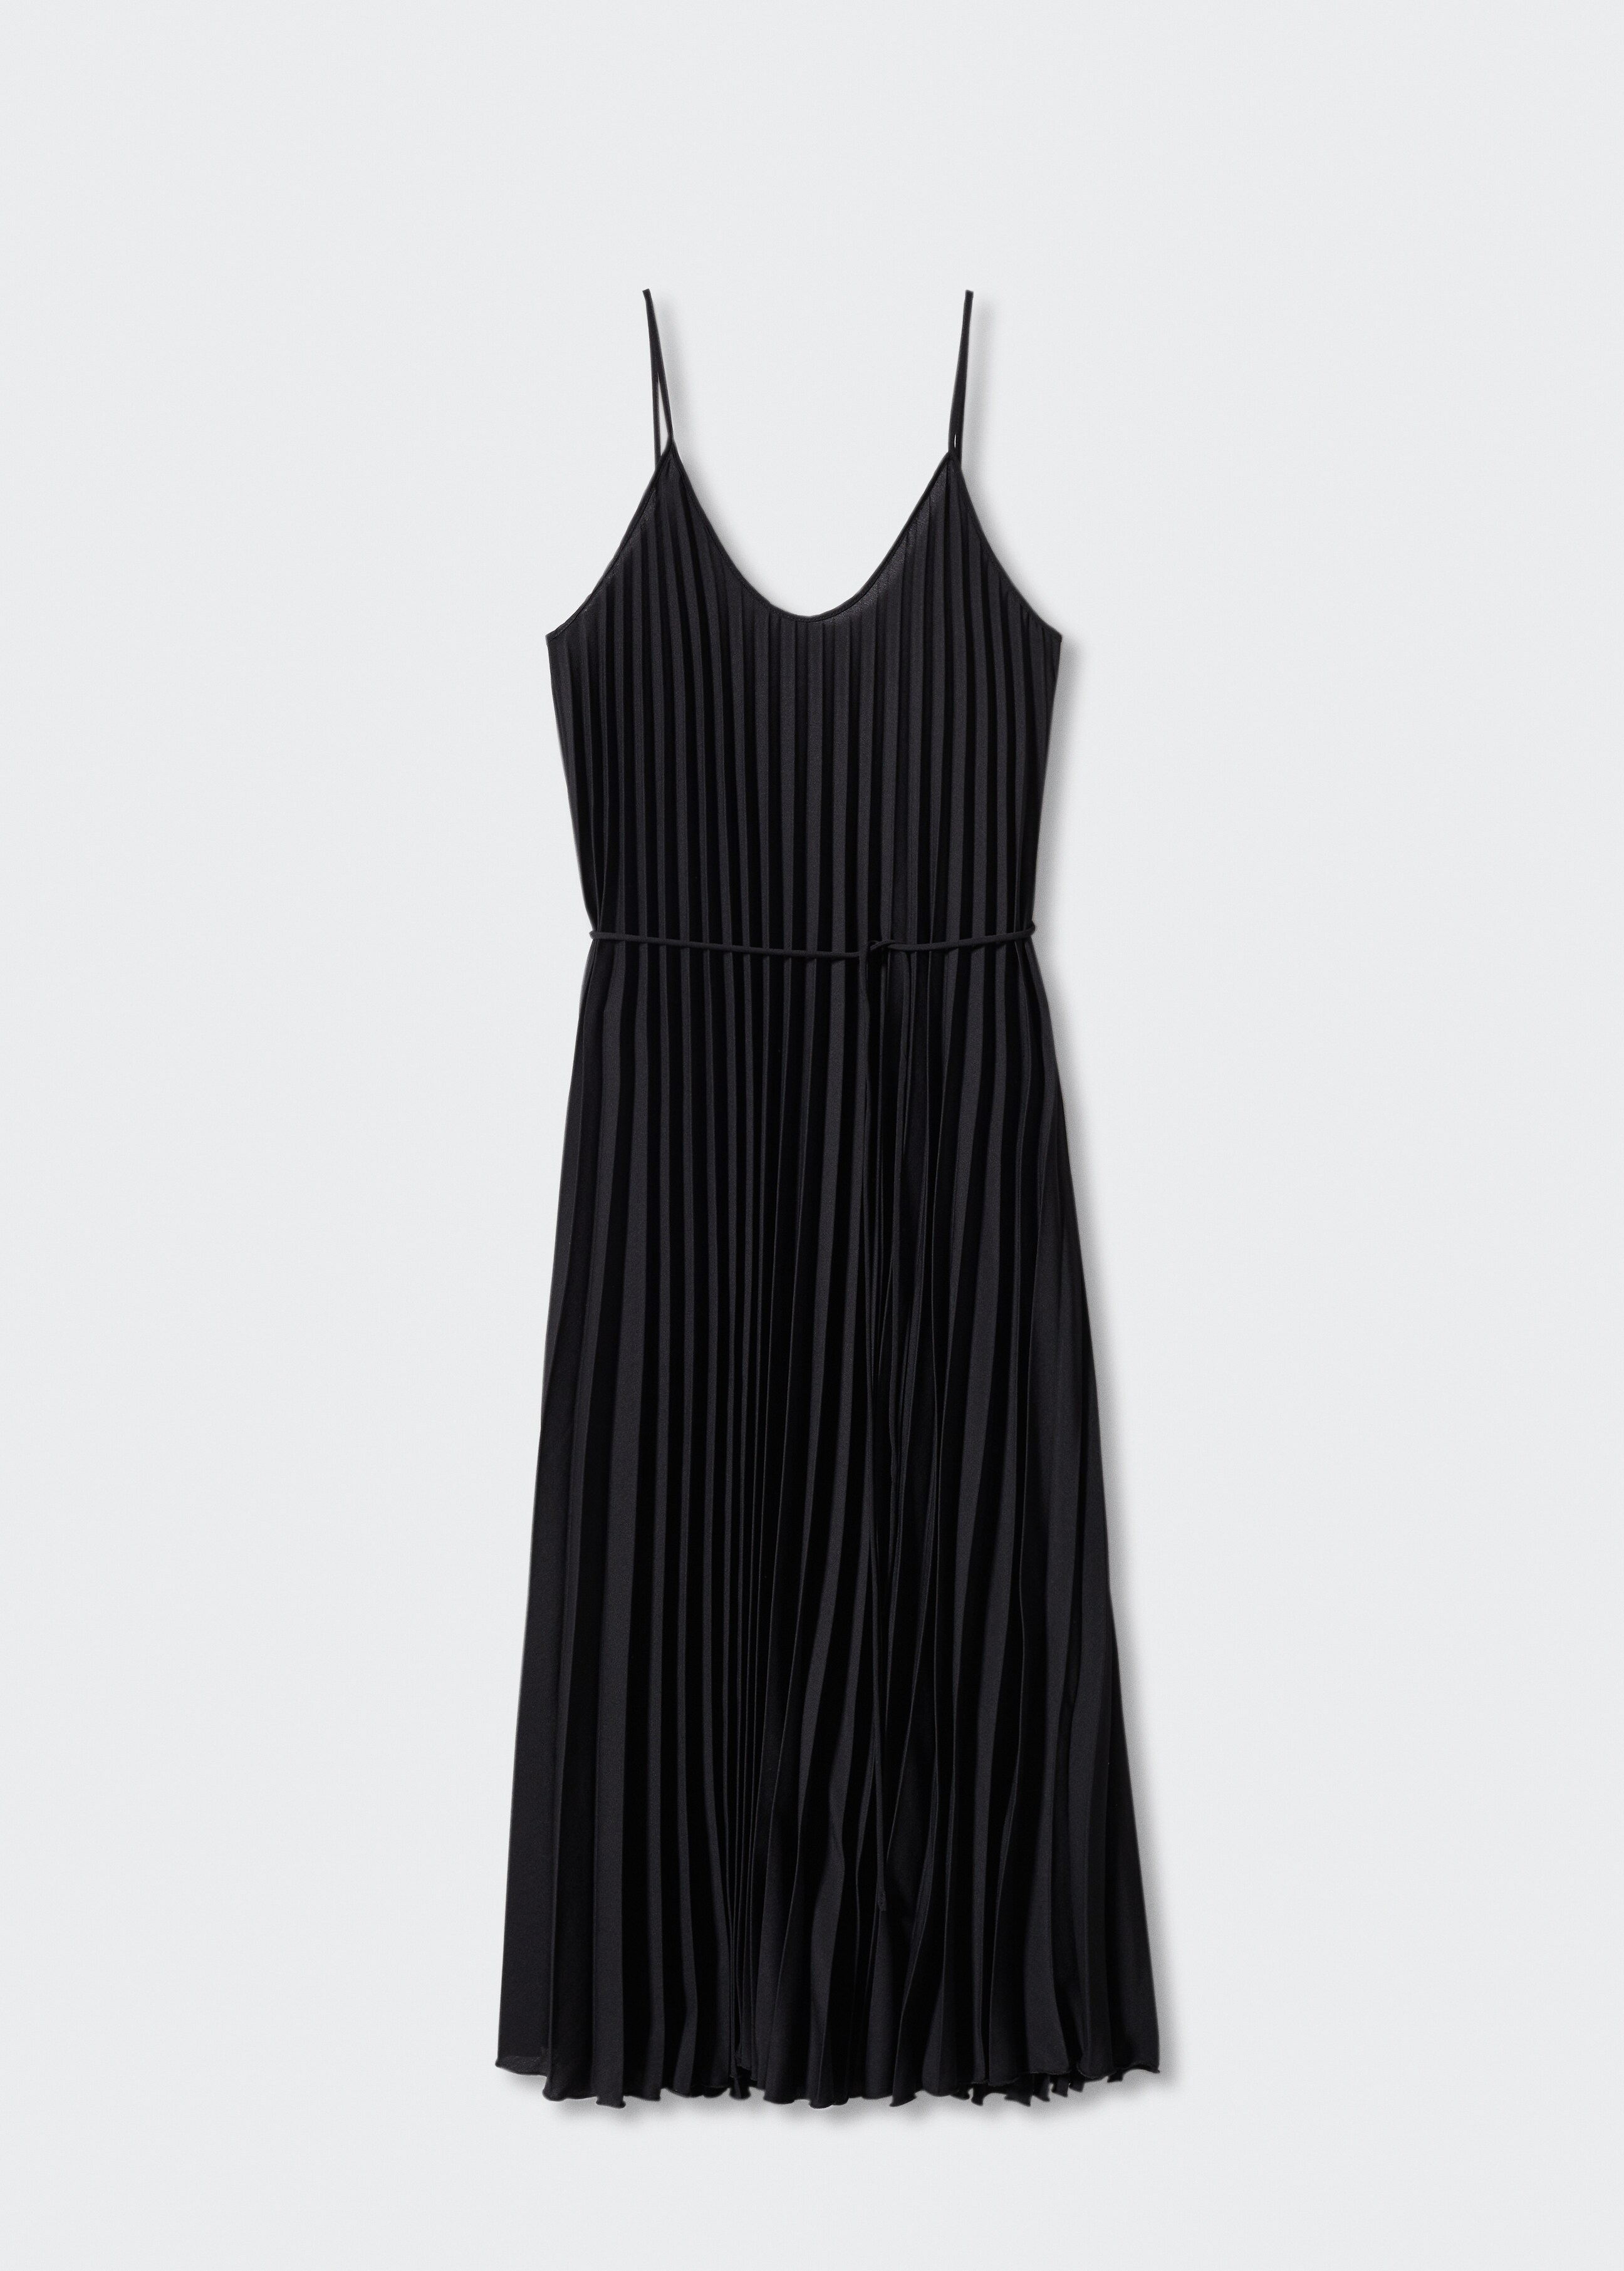 Pleated cord dress - Article without model